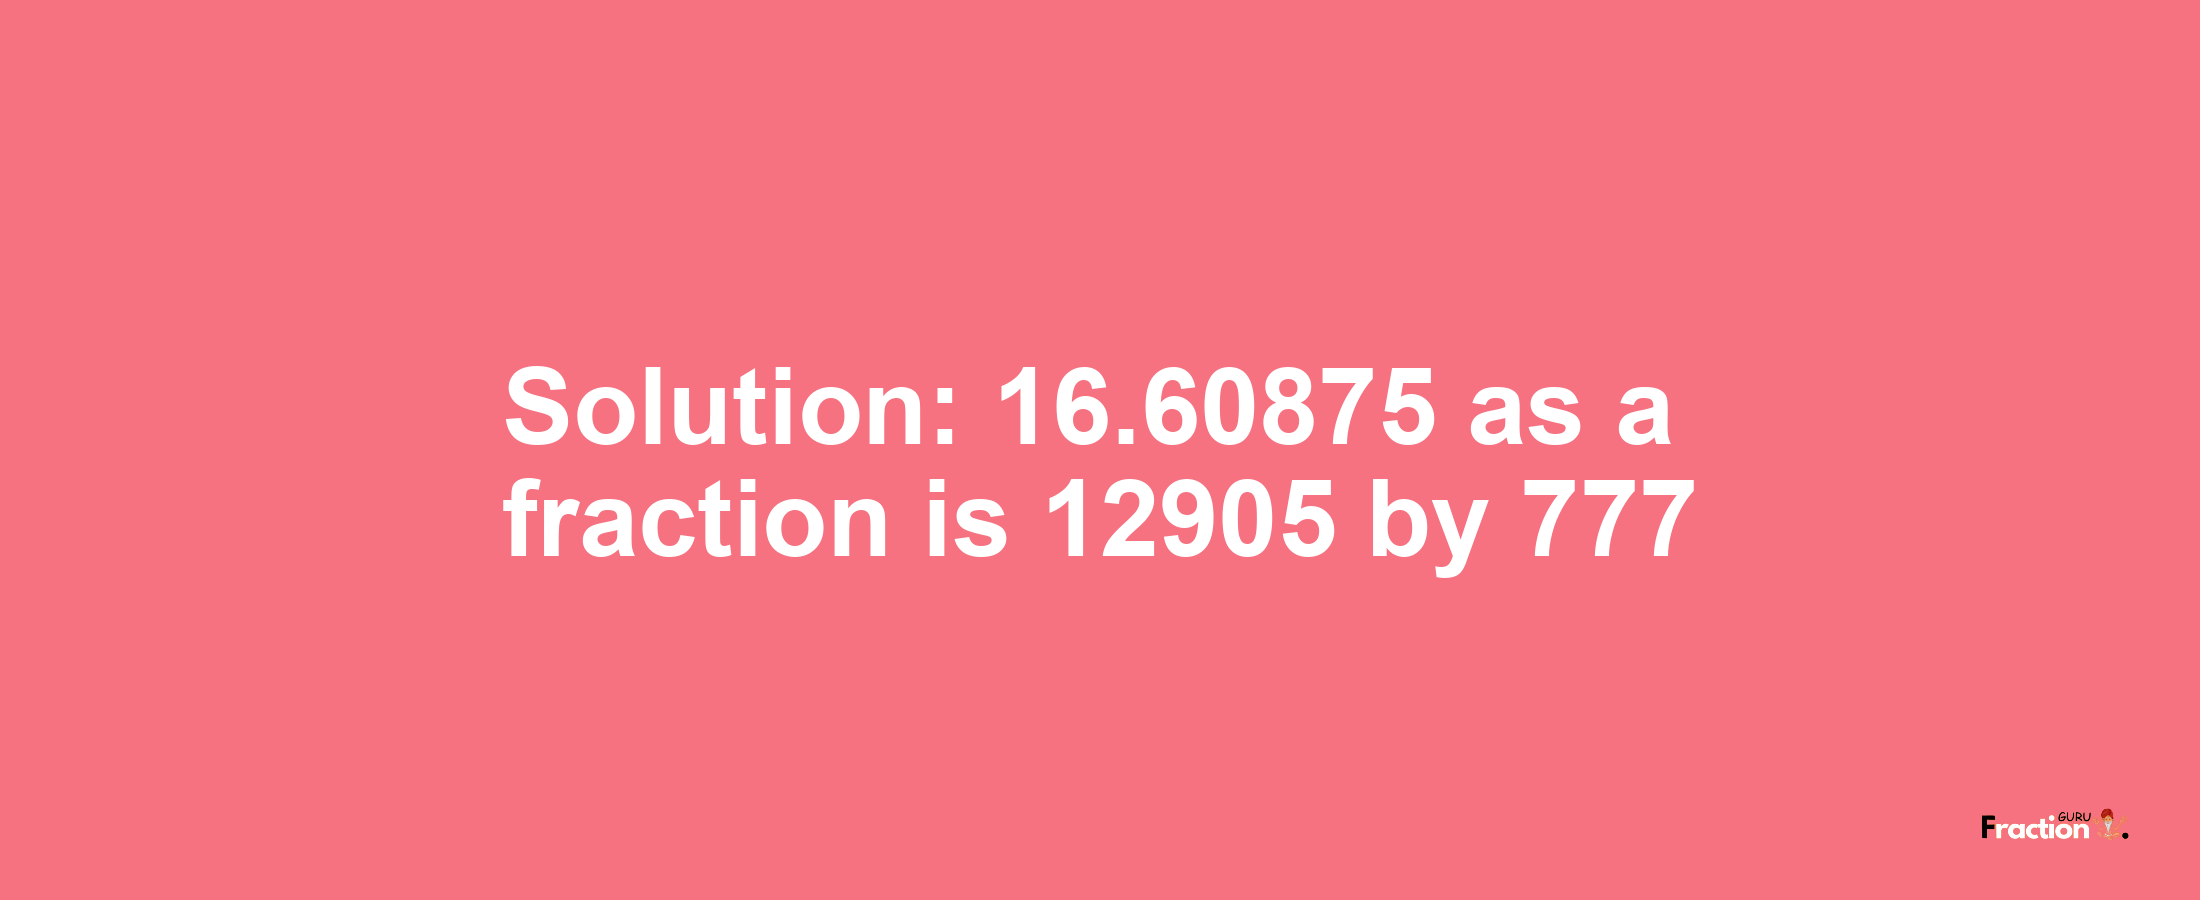 Solution:16.60875 as a fraction is 12905/777